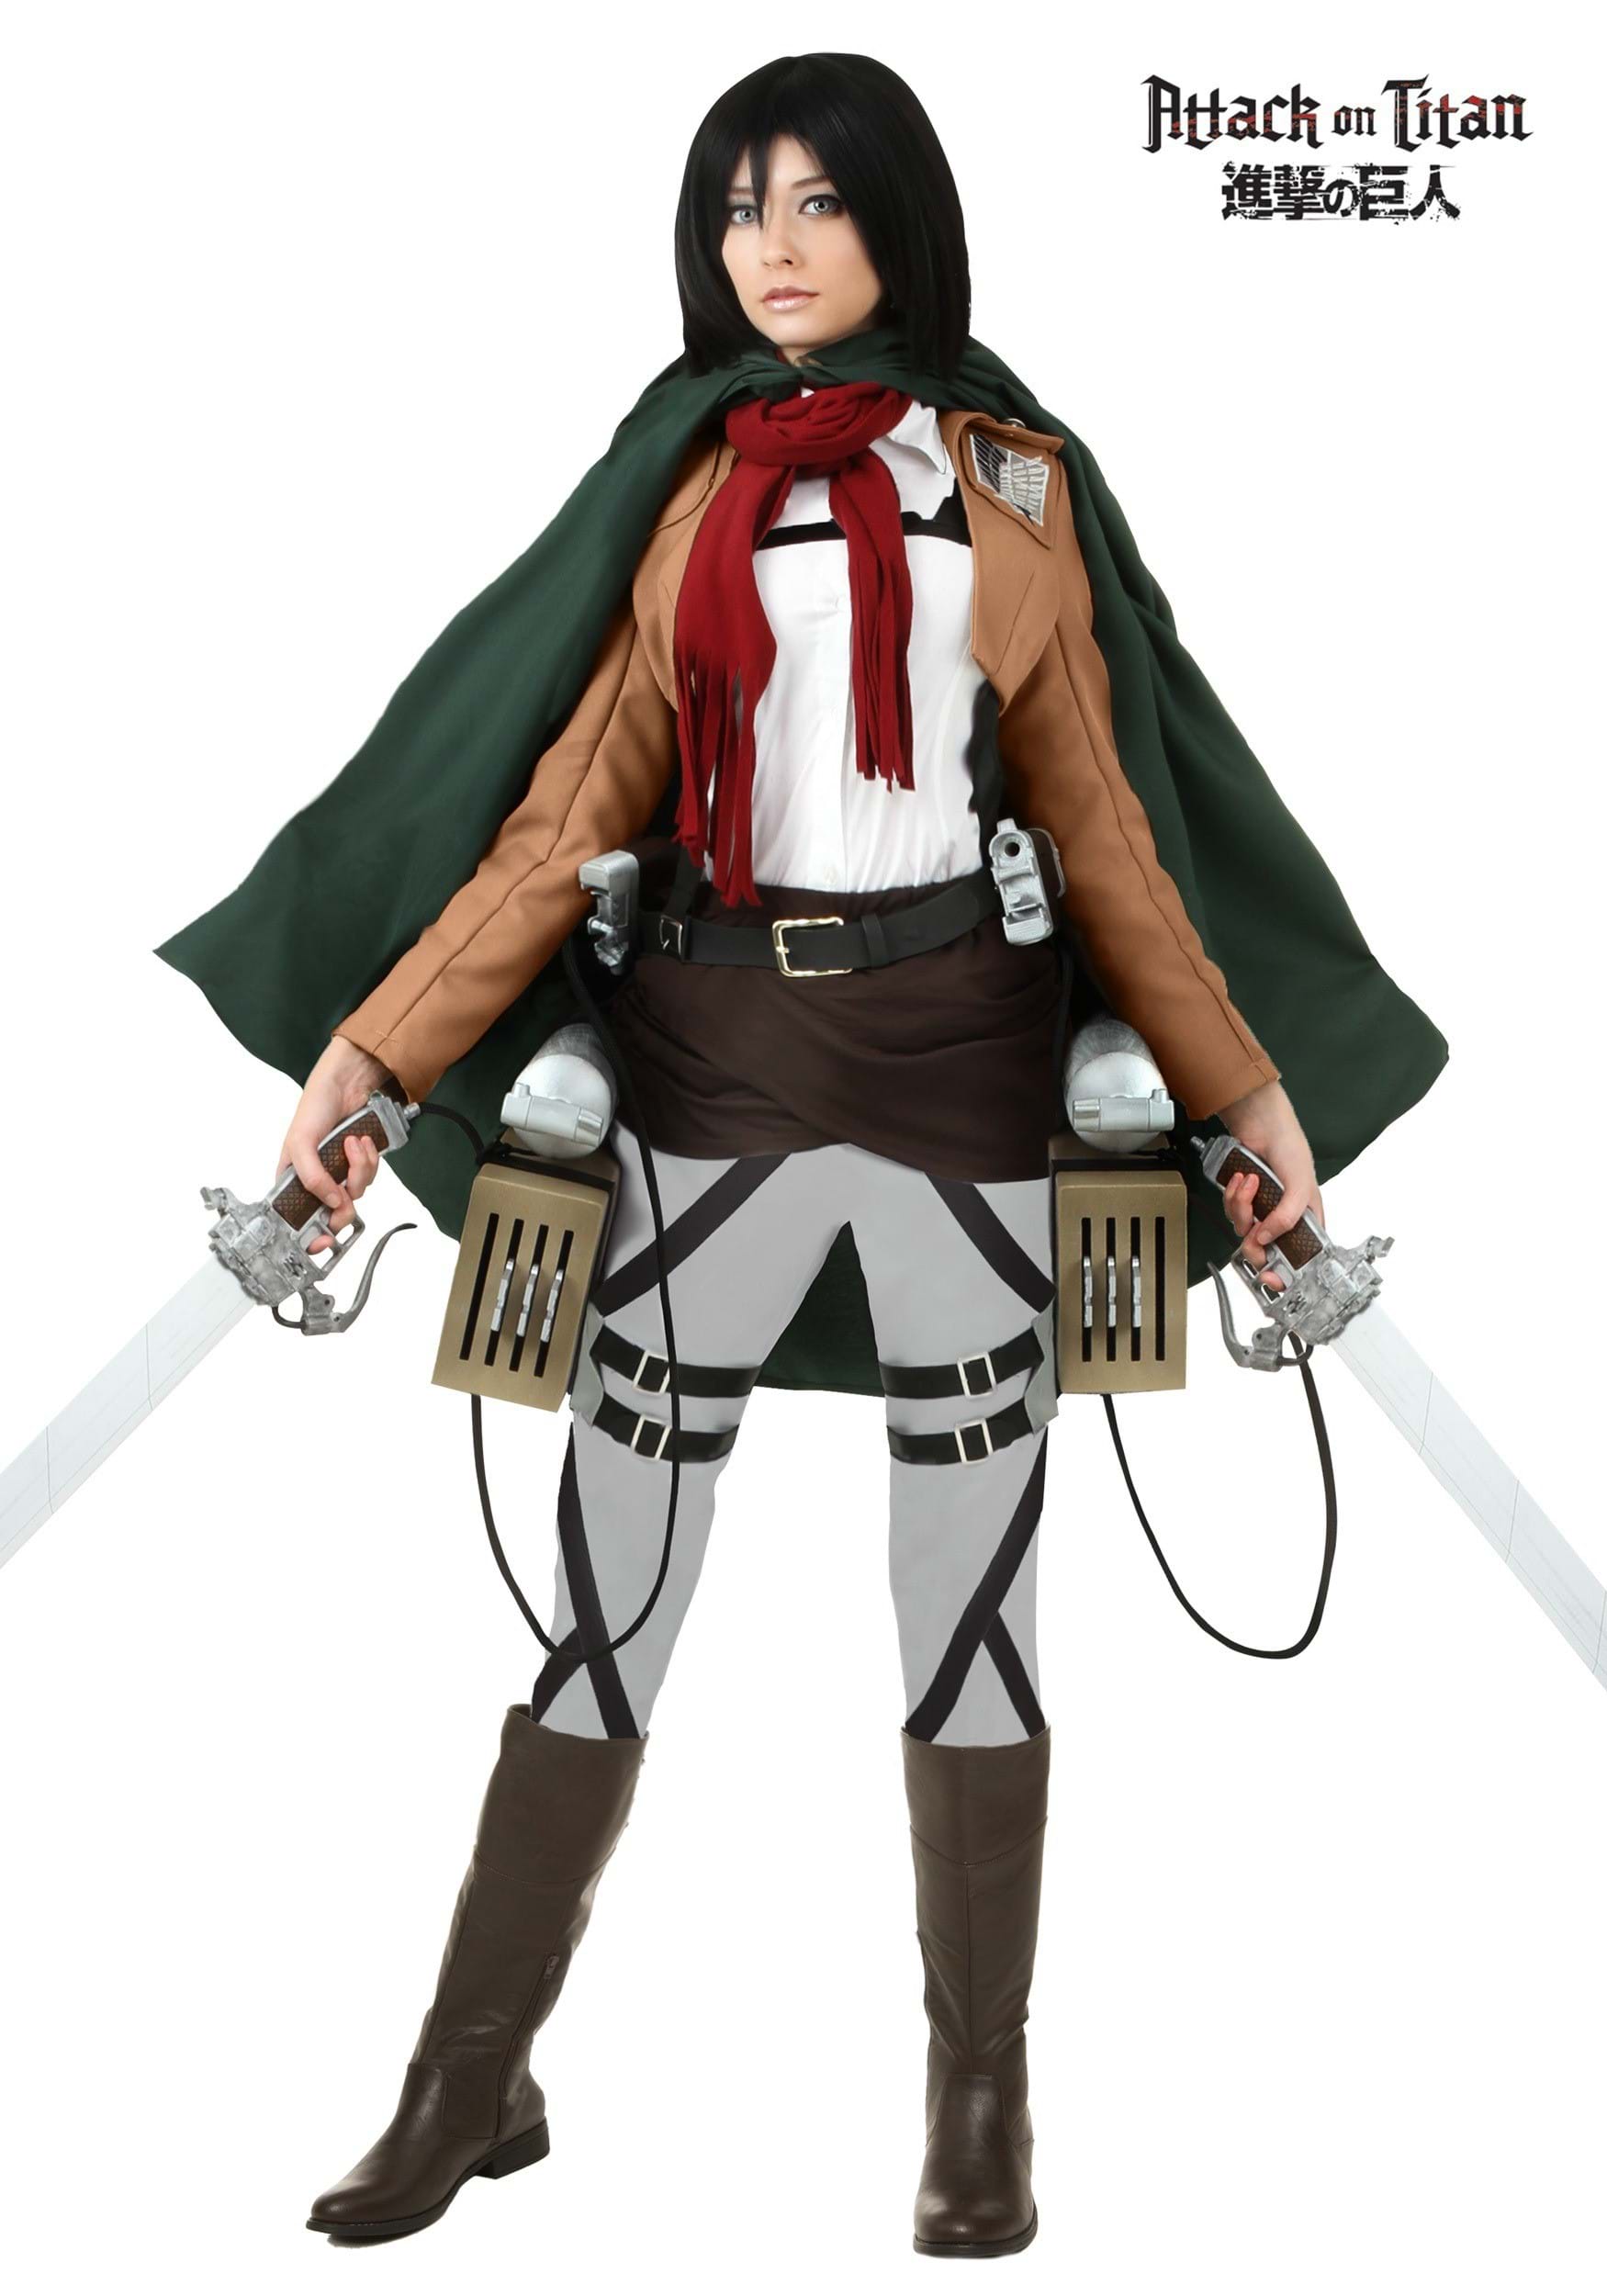 crystal blatz recommends Mikasa Cosplay Outfit